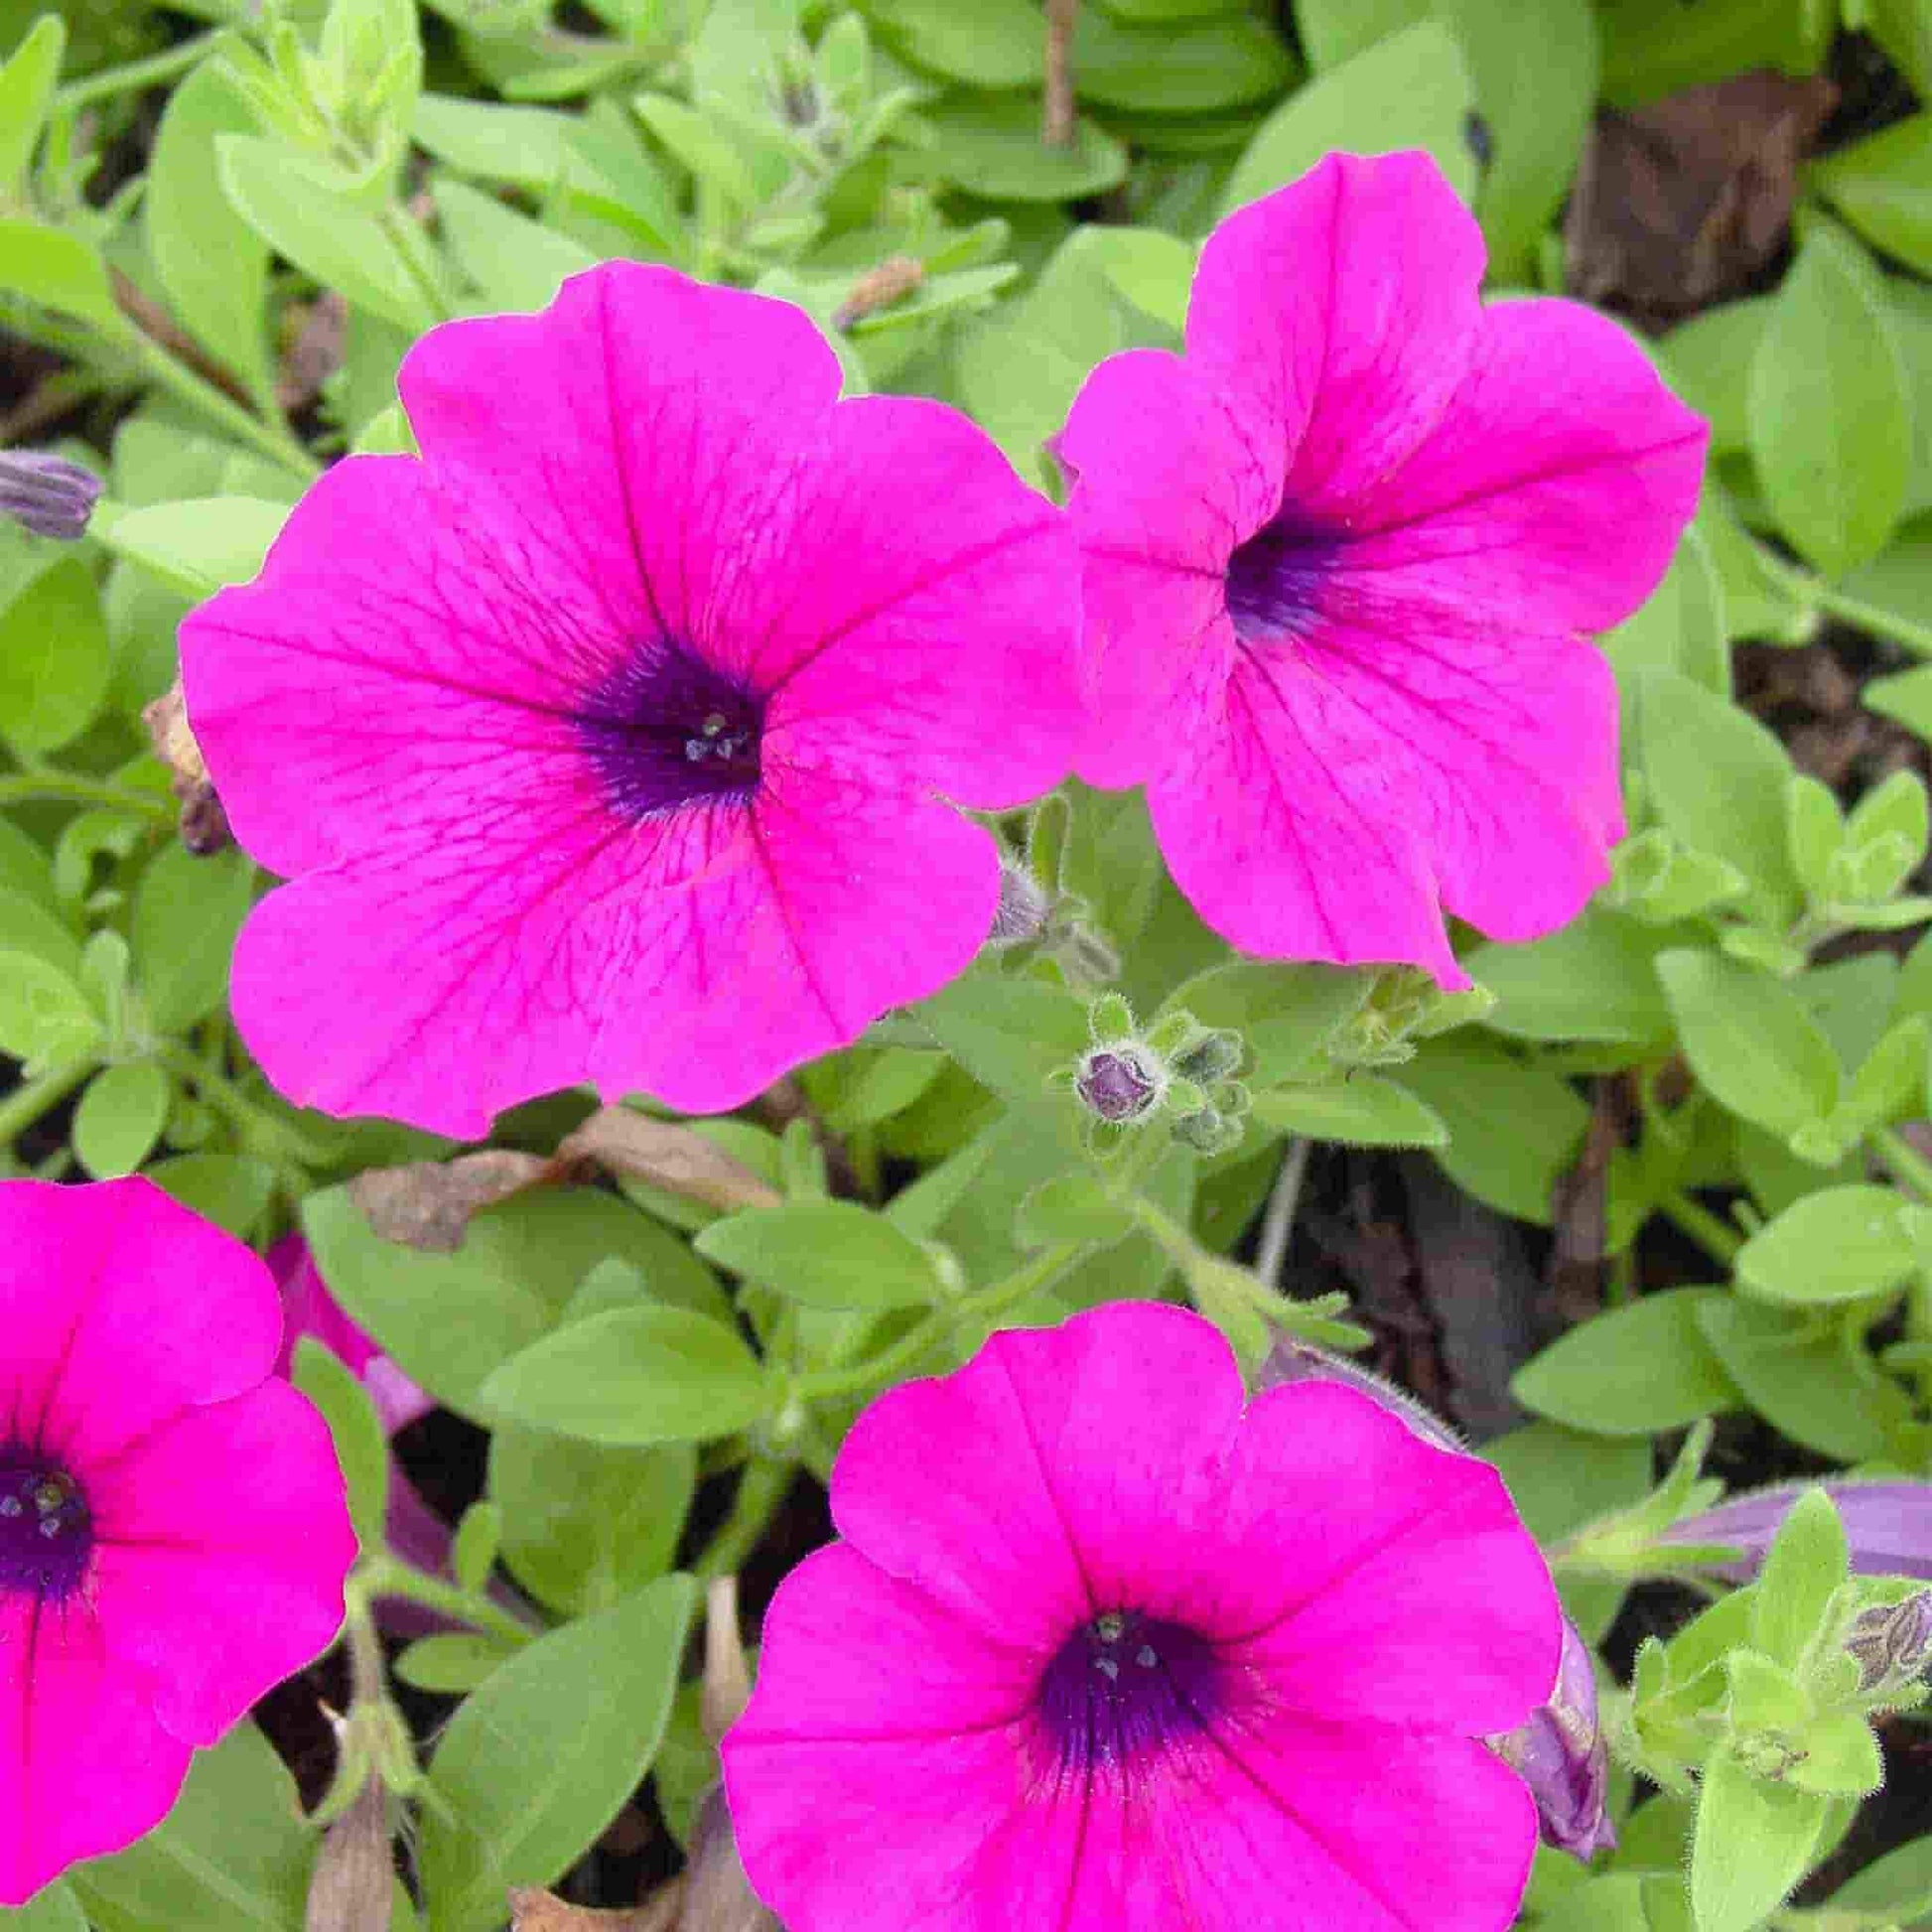 Picture shows Dwarf Bedding Petunias with a beautiful magenta-like color in their blooms.